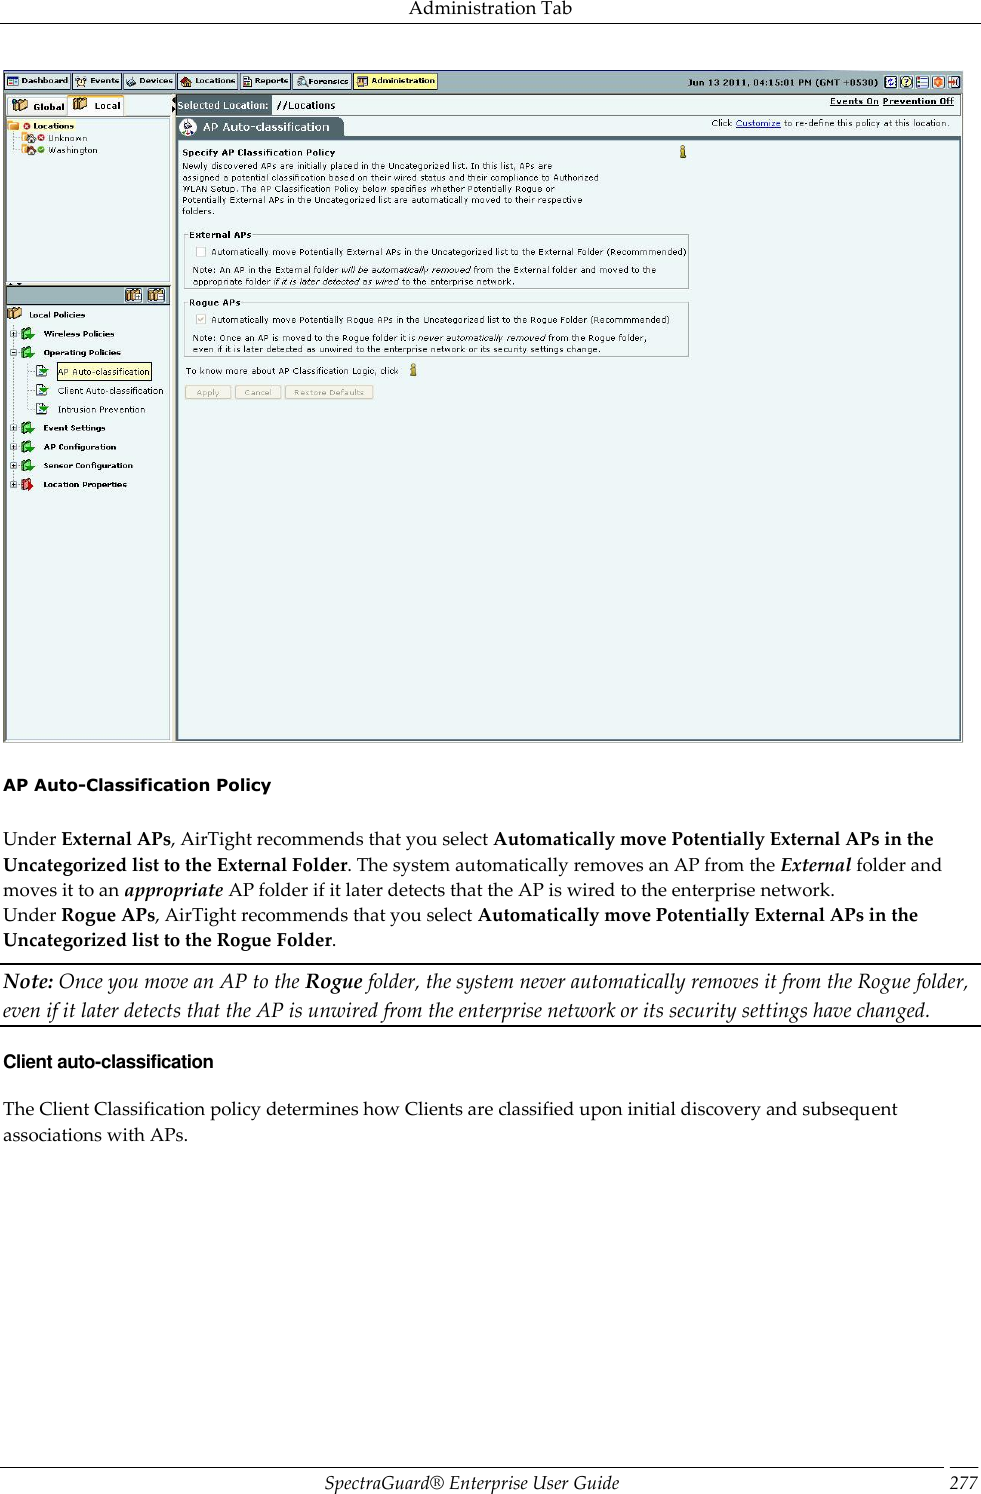 Administration Tab SpectraGuard®  Enterprise User Guide 277    AP Auto-Classification Policy   Under External APs, AirTight recommends that you select Automatically move Potentially External APs in the Uncategorized list to the External Folder. The system automatically removes an AP from the External folder and moves it to an appropriate AP folder if it later detects that the AP is wired to the enterprise network. Under Rogue APs, AirTight recommends that you select Automatically move Potentially External APs in the Uncategorized list to the Rogue Folder. Note: Once you move an AP to the Rogue folder, the system never automatically removes it from the Rogue folder, even if it later detects that the AP is unwired from the enterprise network or its security settings have changed. Client auto-classification The Client Classification policy determines how Clients are classified upon initial discovery and subsequent associations with APs. 